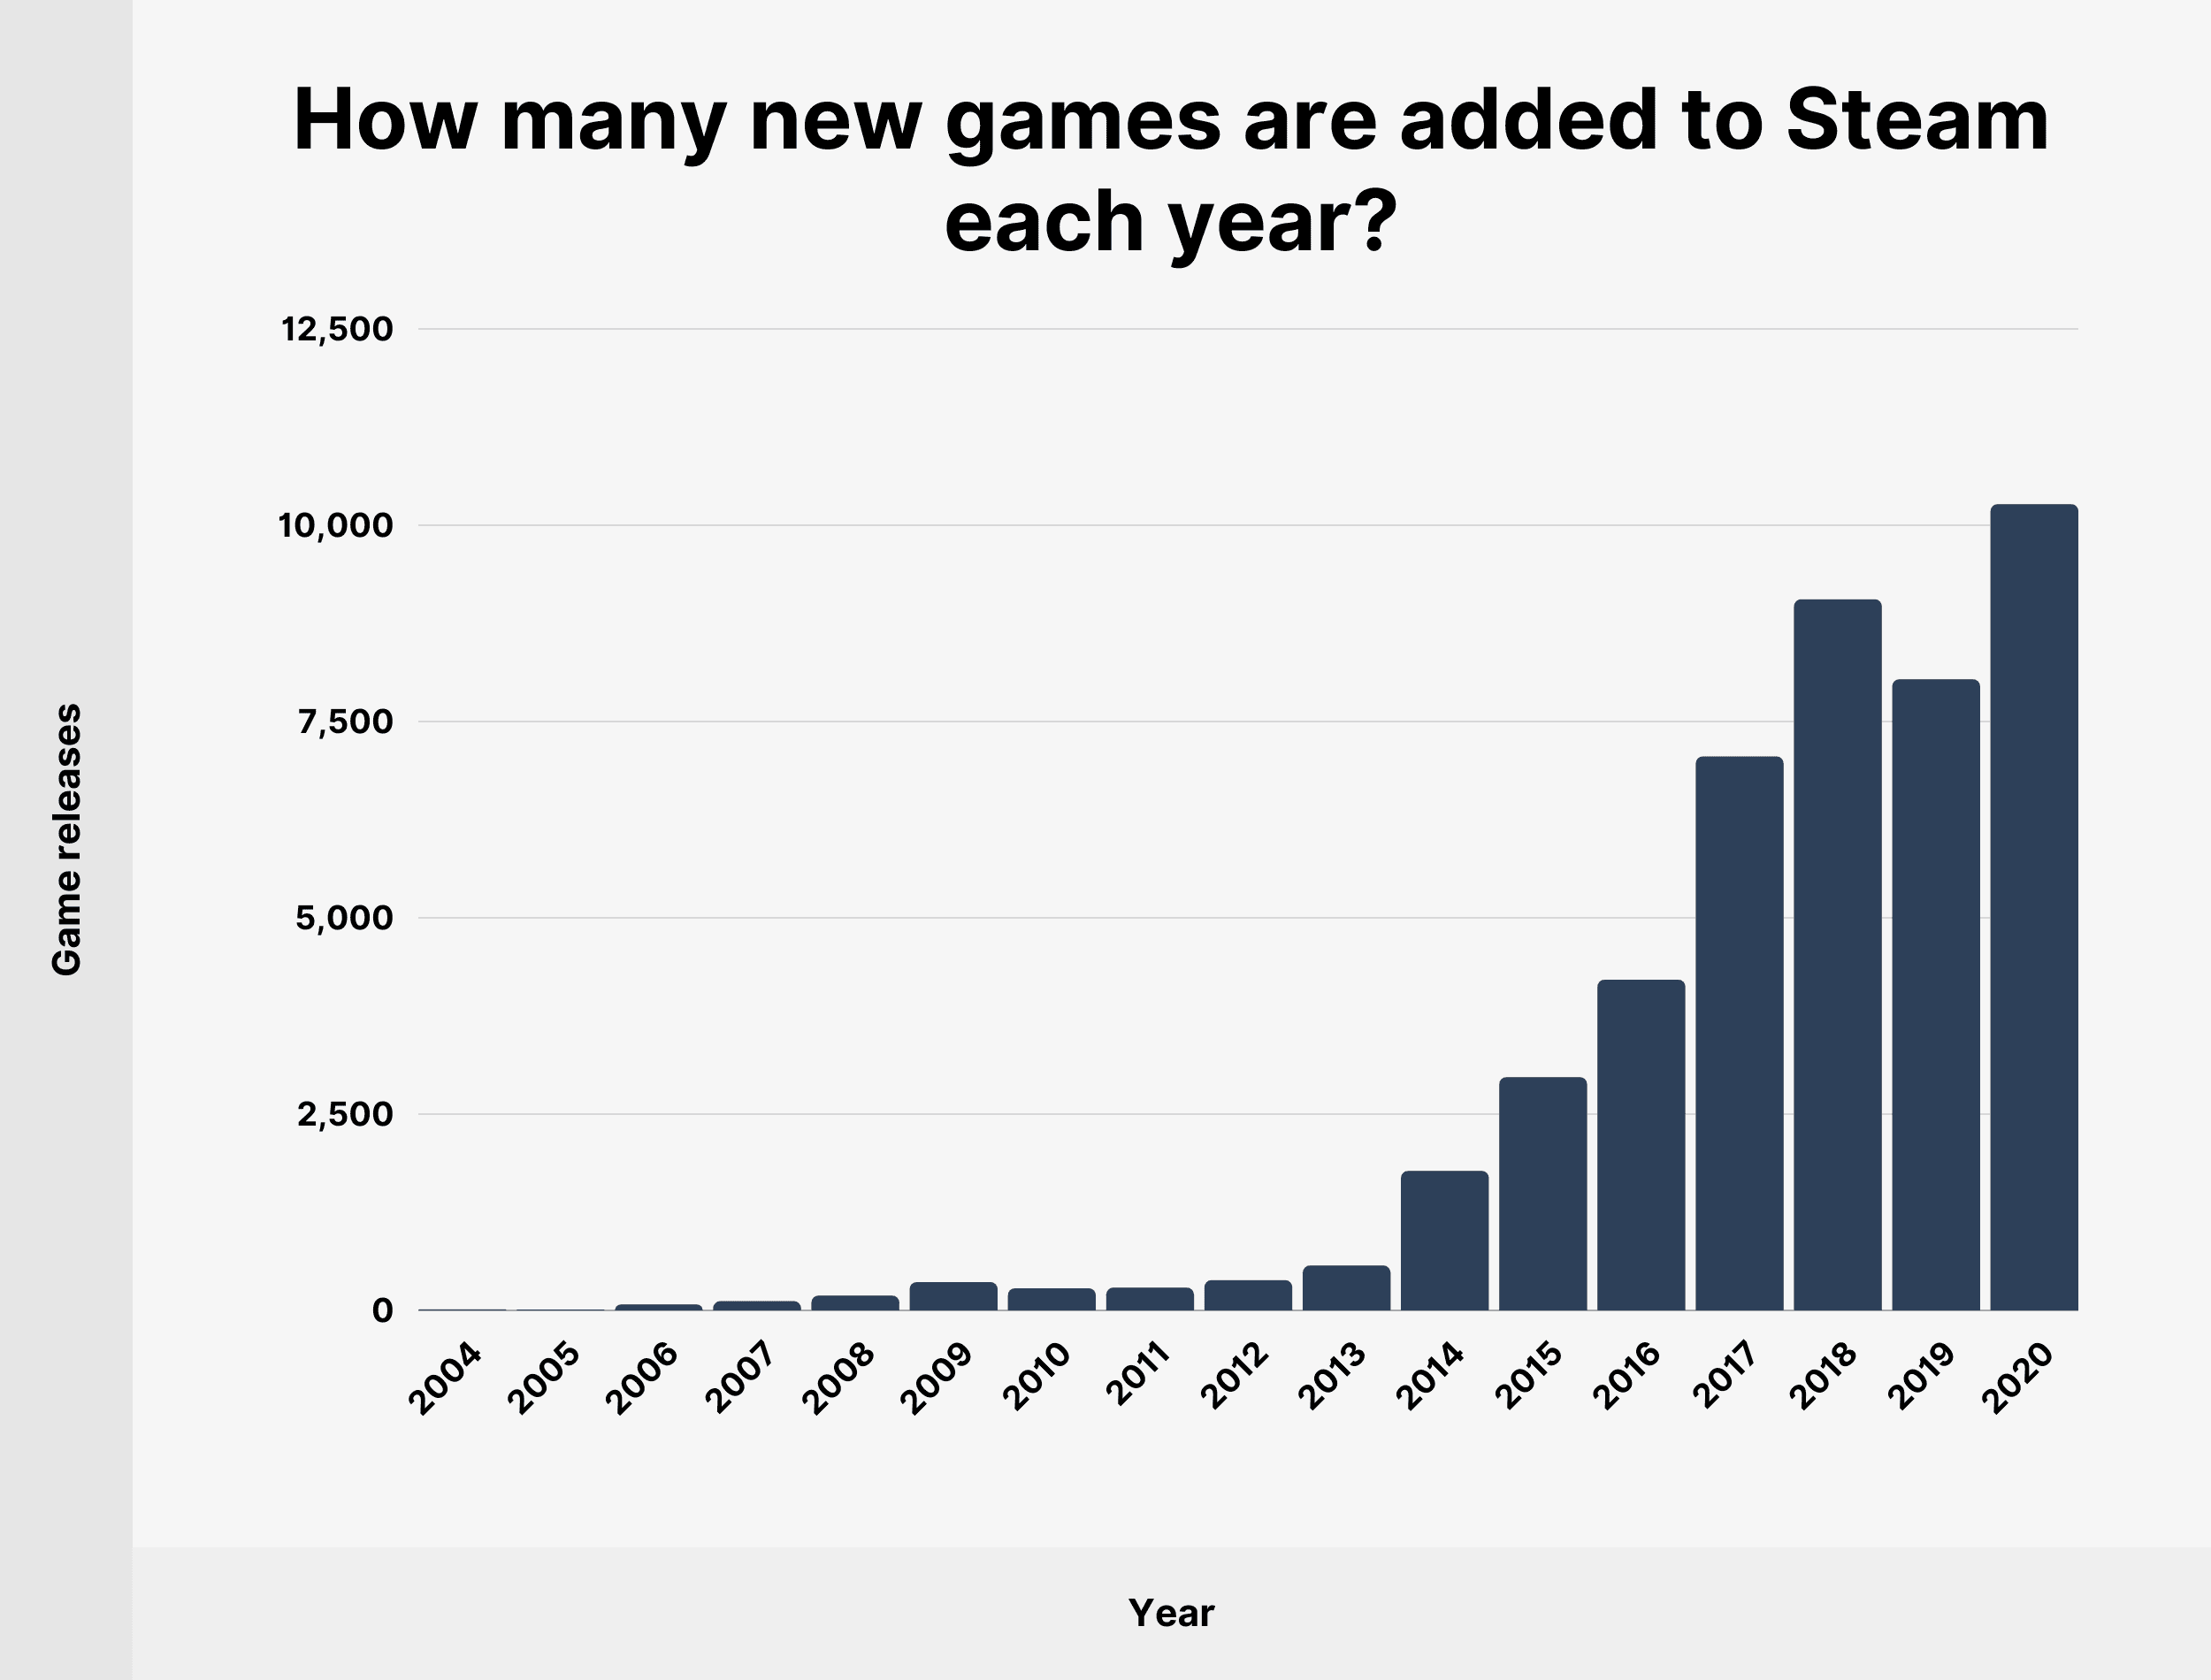 How many new games are added to Steam each year?